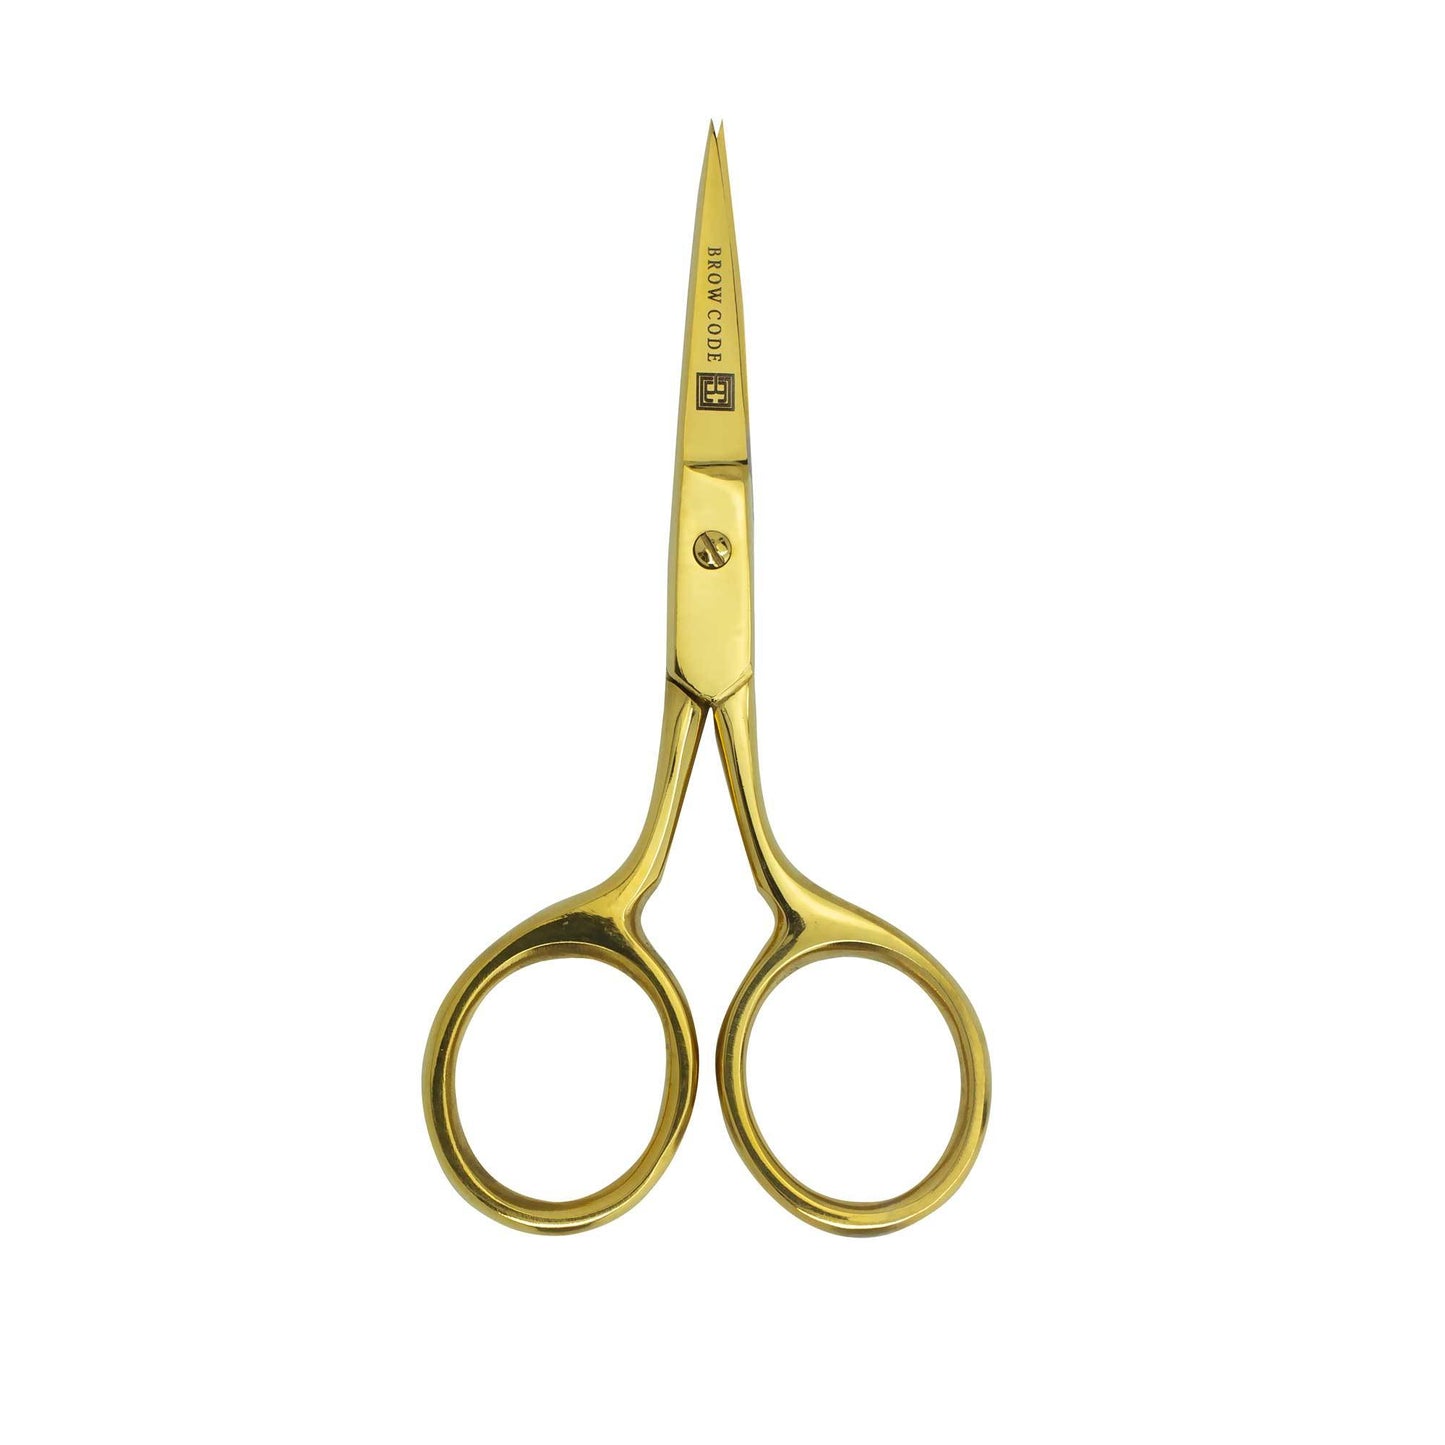 Trimming Scissors against a white background